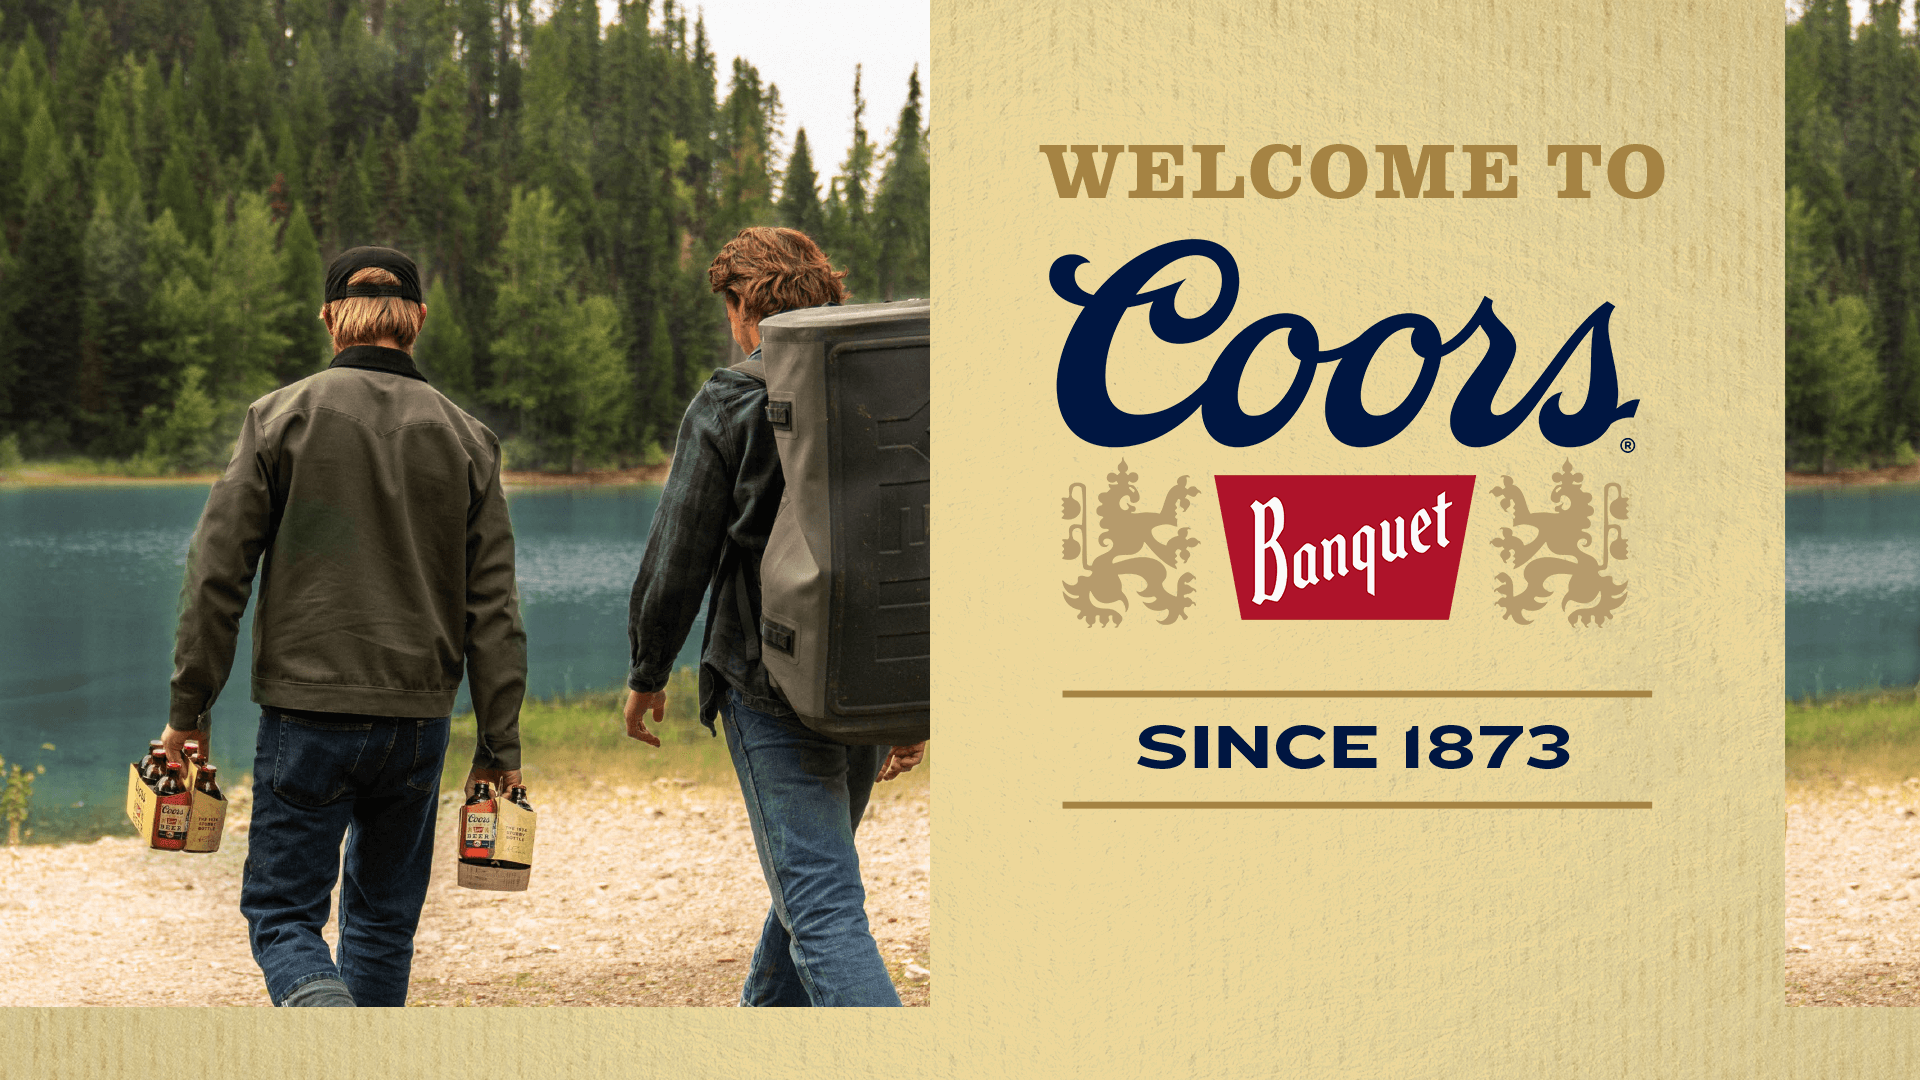 Welcome to Coors Banquet since 1873